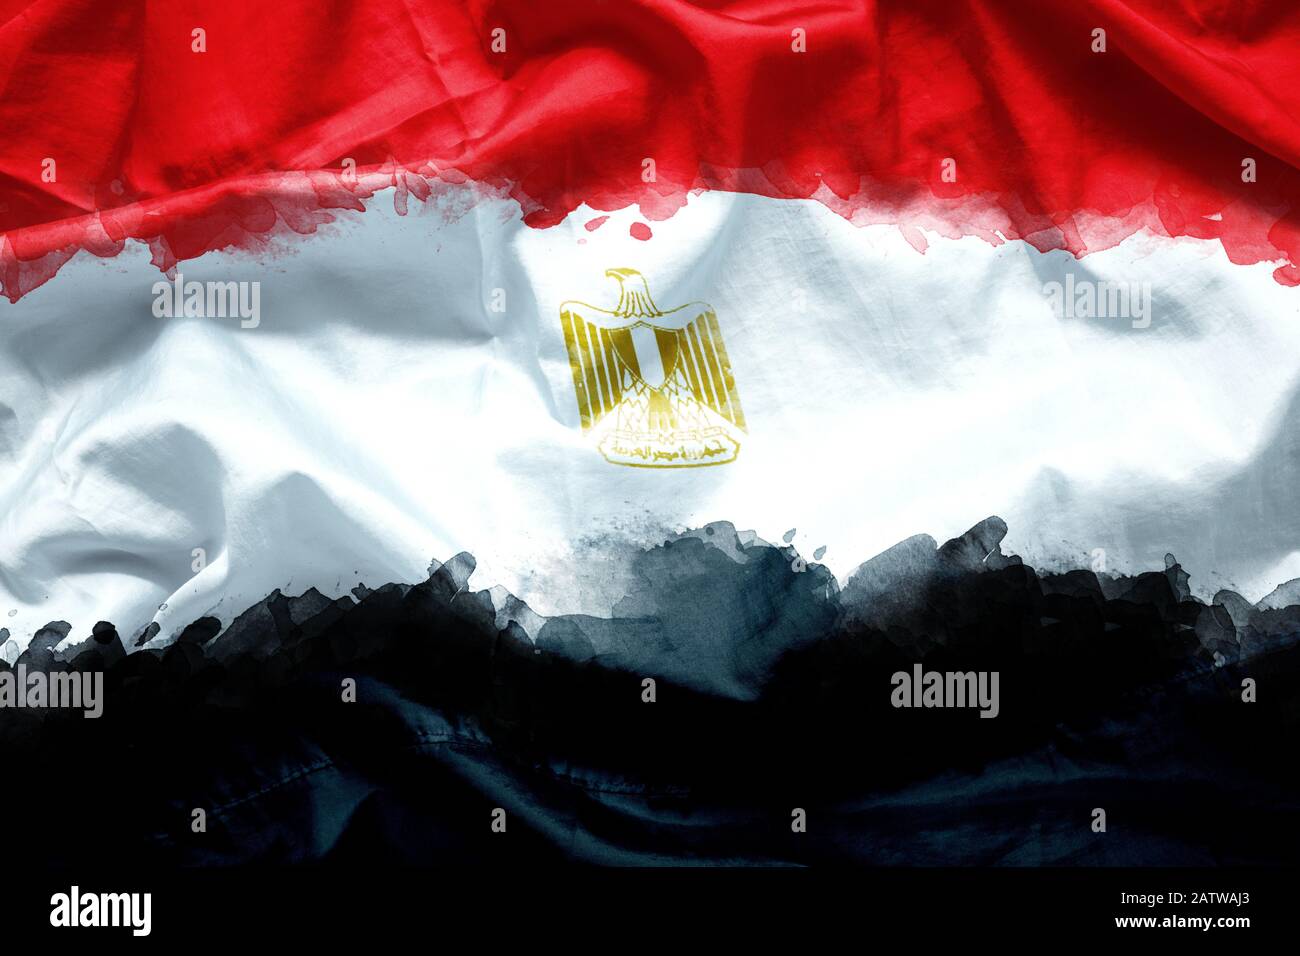 Flag Arab Republic of Egypt by watercolor paint brush on canvas fabric, grunge style Stock Photo